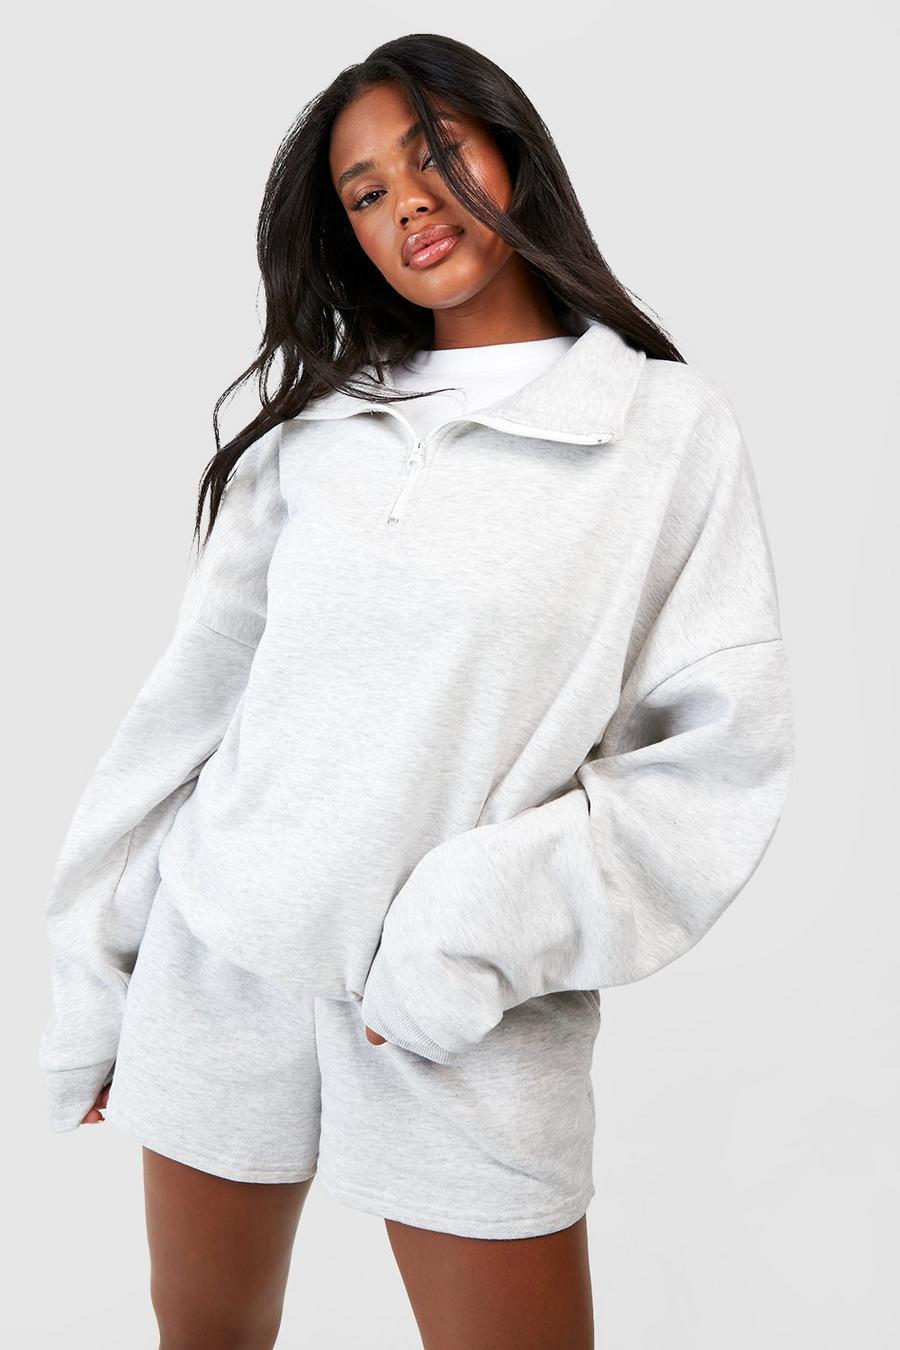 Womens Fall Outfits Hoodies Long Sleeve Sweatshirt Past Orders 2023,Coupons  And Promo Codes For Prime Discount,Sweatshirt Under 20 Dollars For  Women,Cheap Cute Stuff Under 5 Dollars,Teacher 2023 Deals : Clothing, Shoes  & Jewelry 